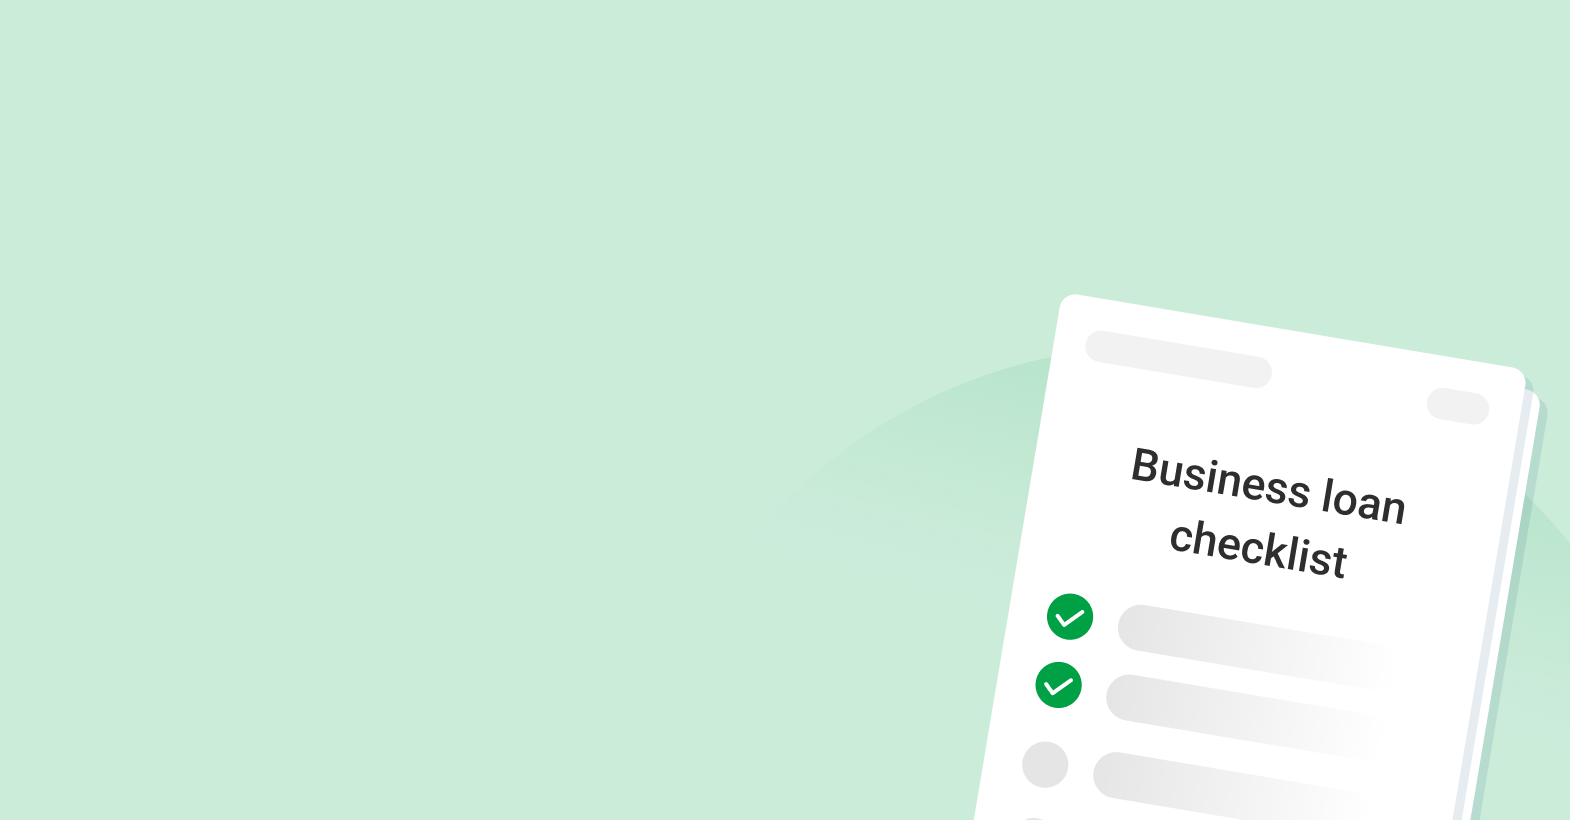 Capitalise: Business funding checklist - how do I know if I need funding? image